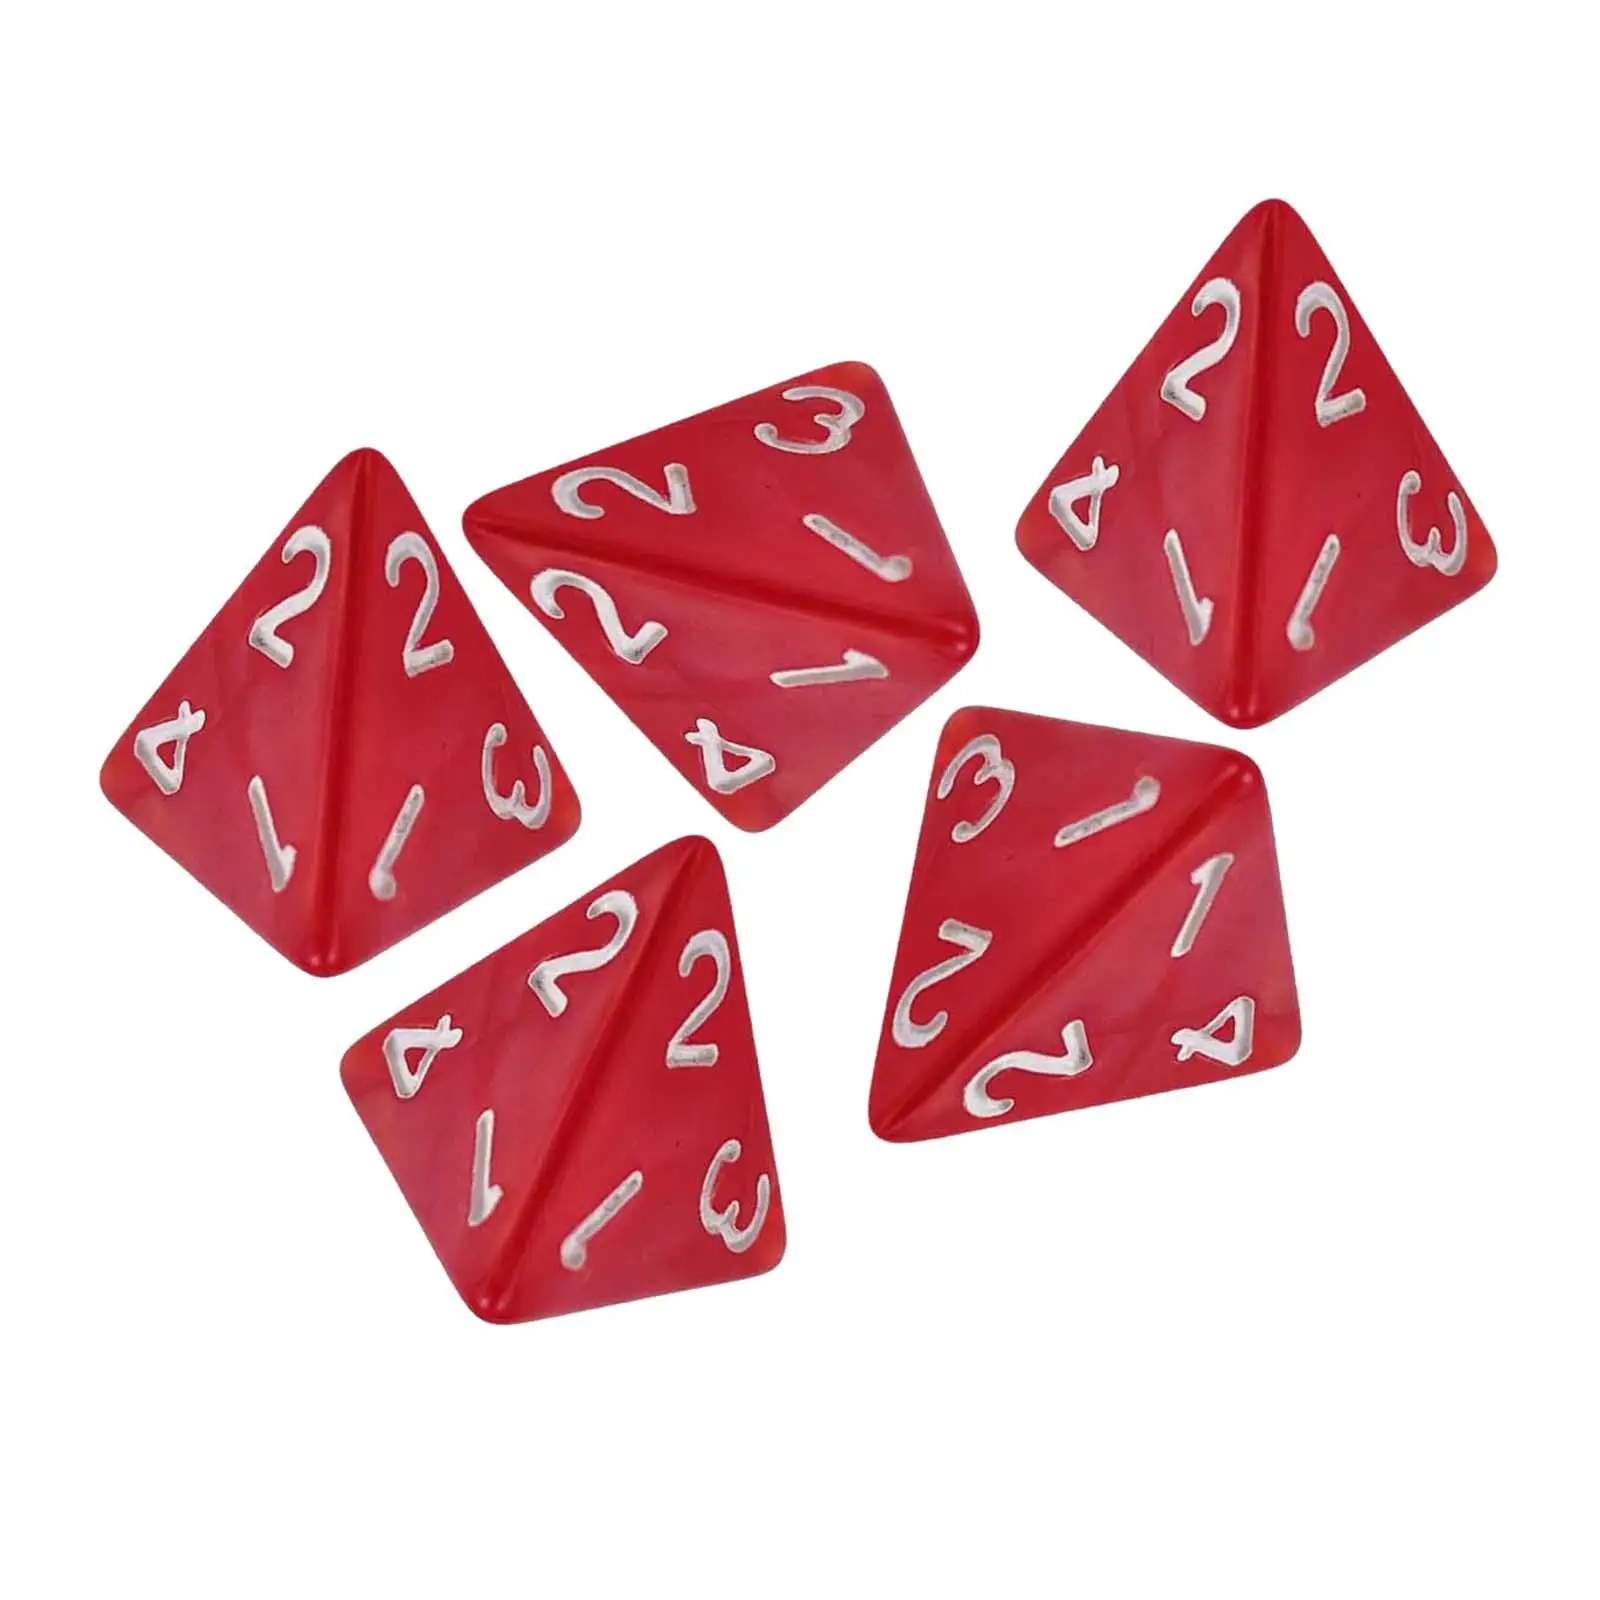 10 Pieces Multi Sided Game Dices Dice Set, Entertainment Toys, Math Counting